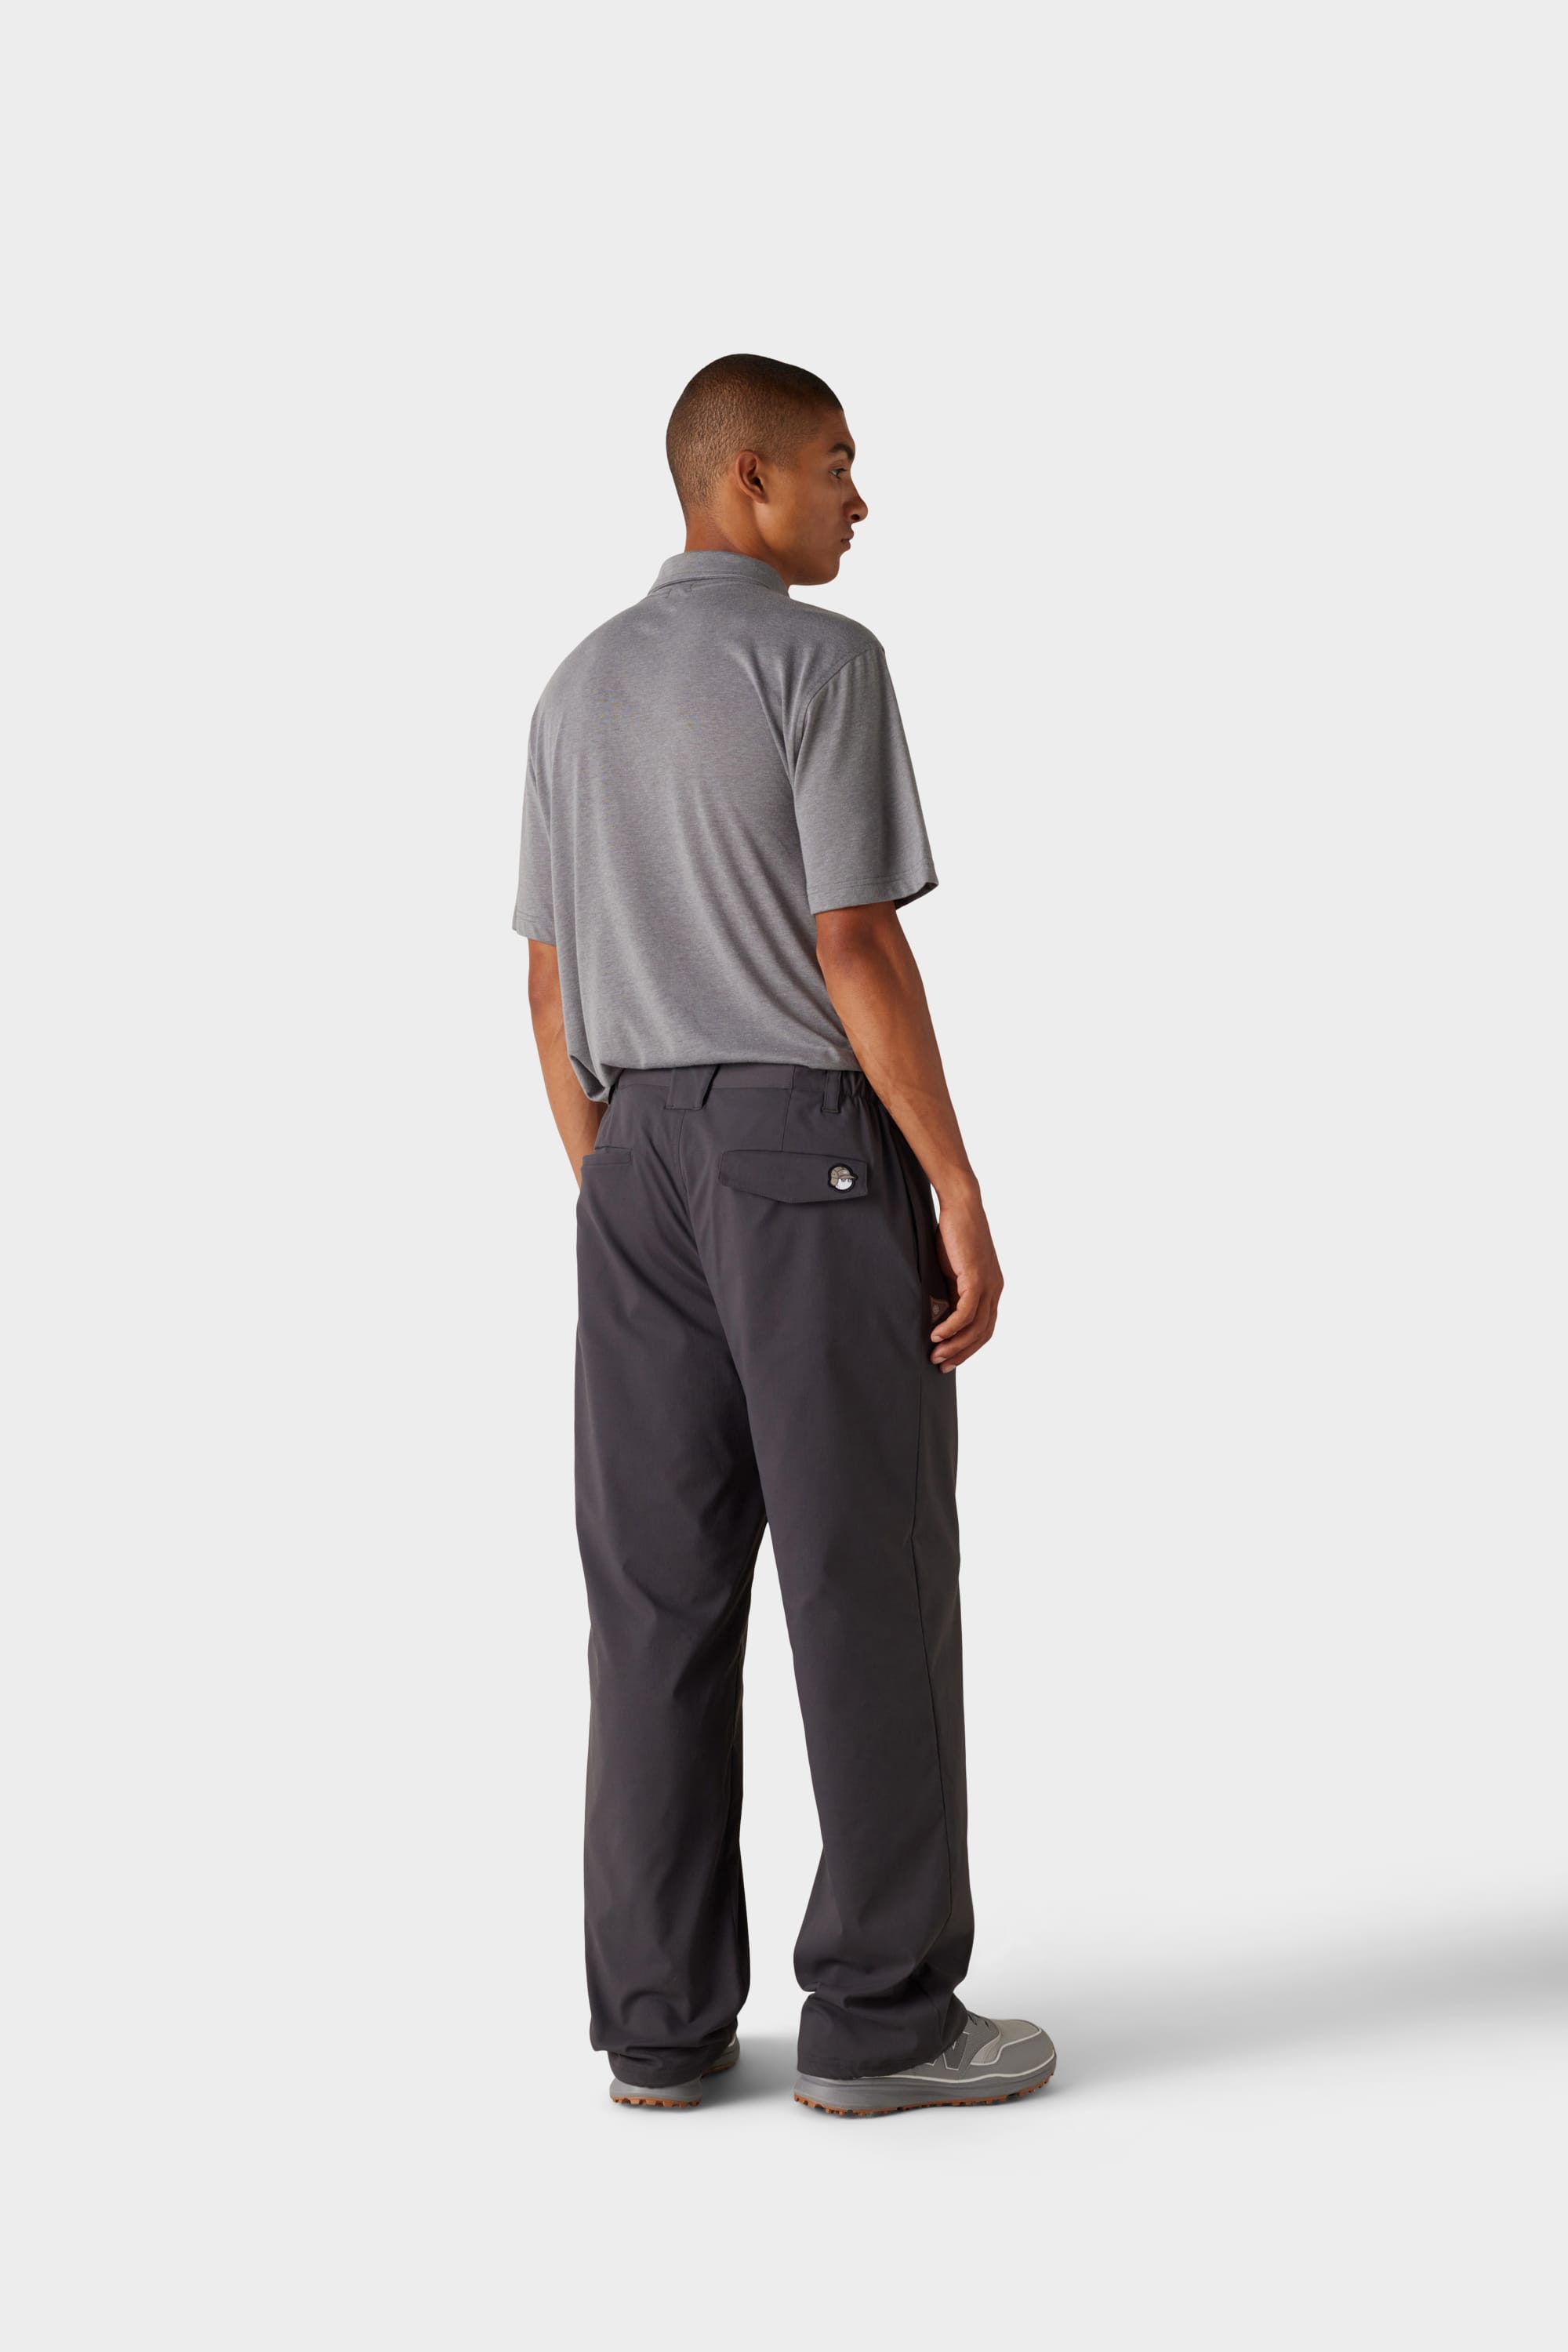 Russell 33347M | Deluxe Relaxed Fit Baseball Pant